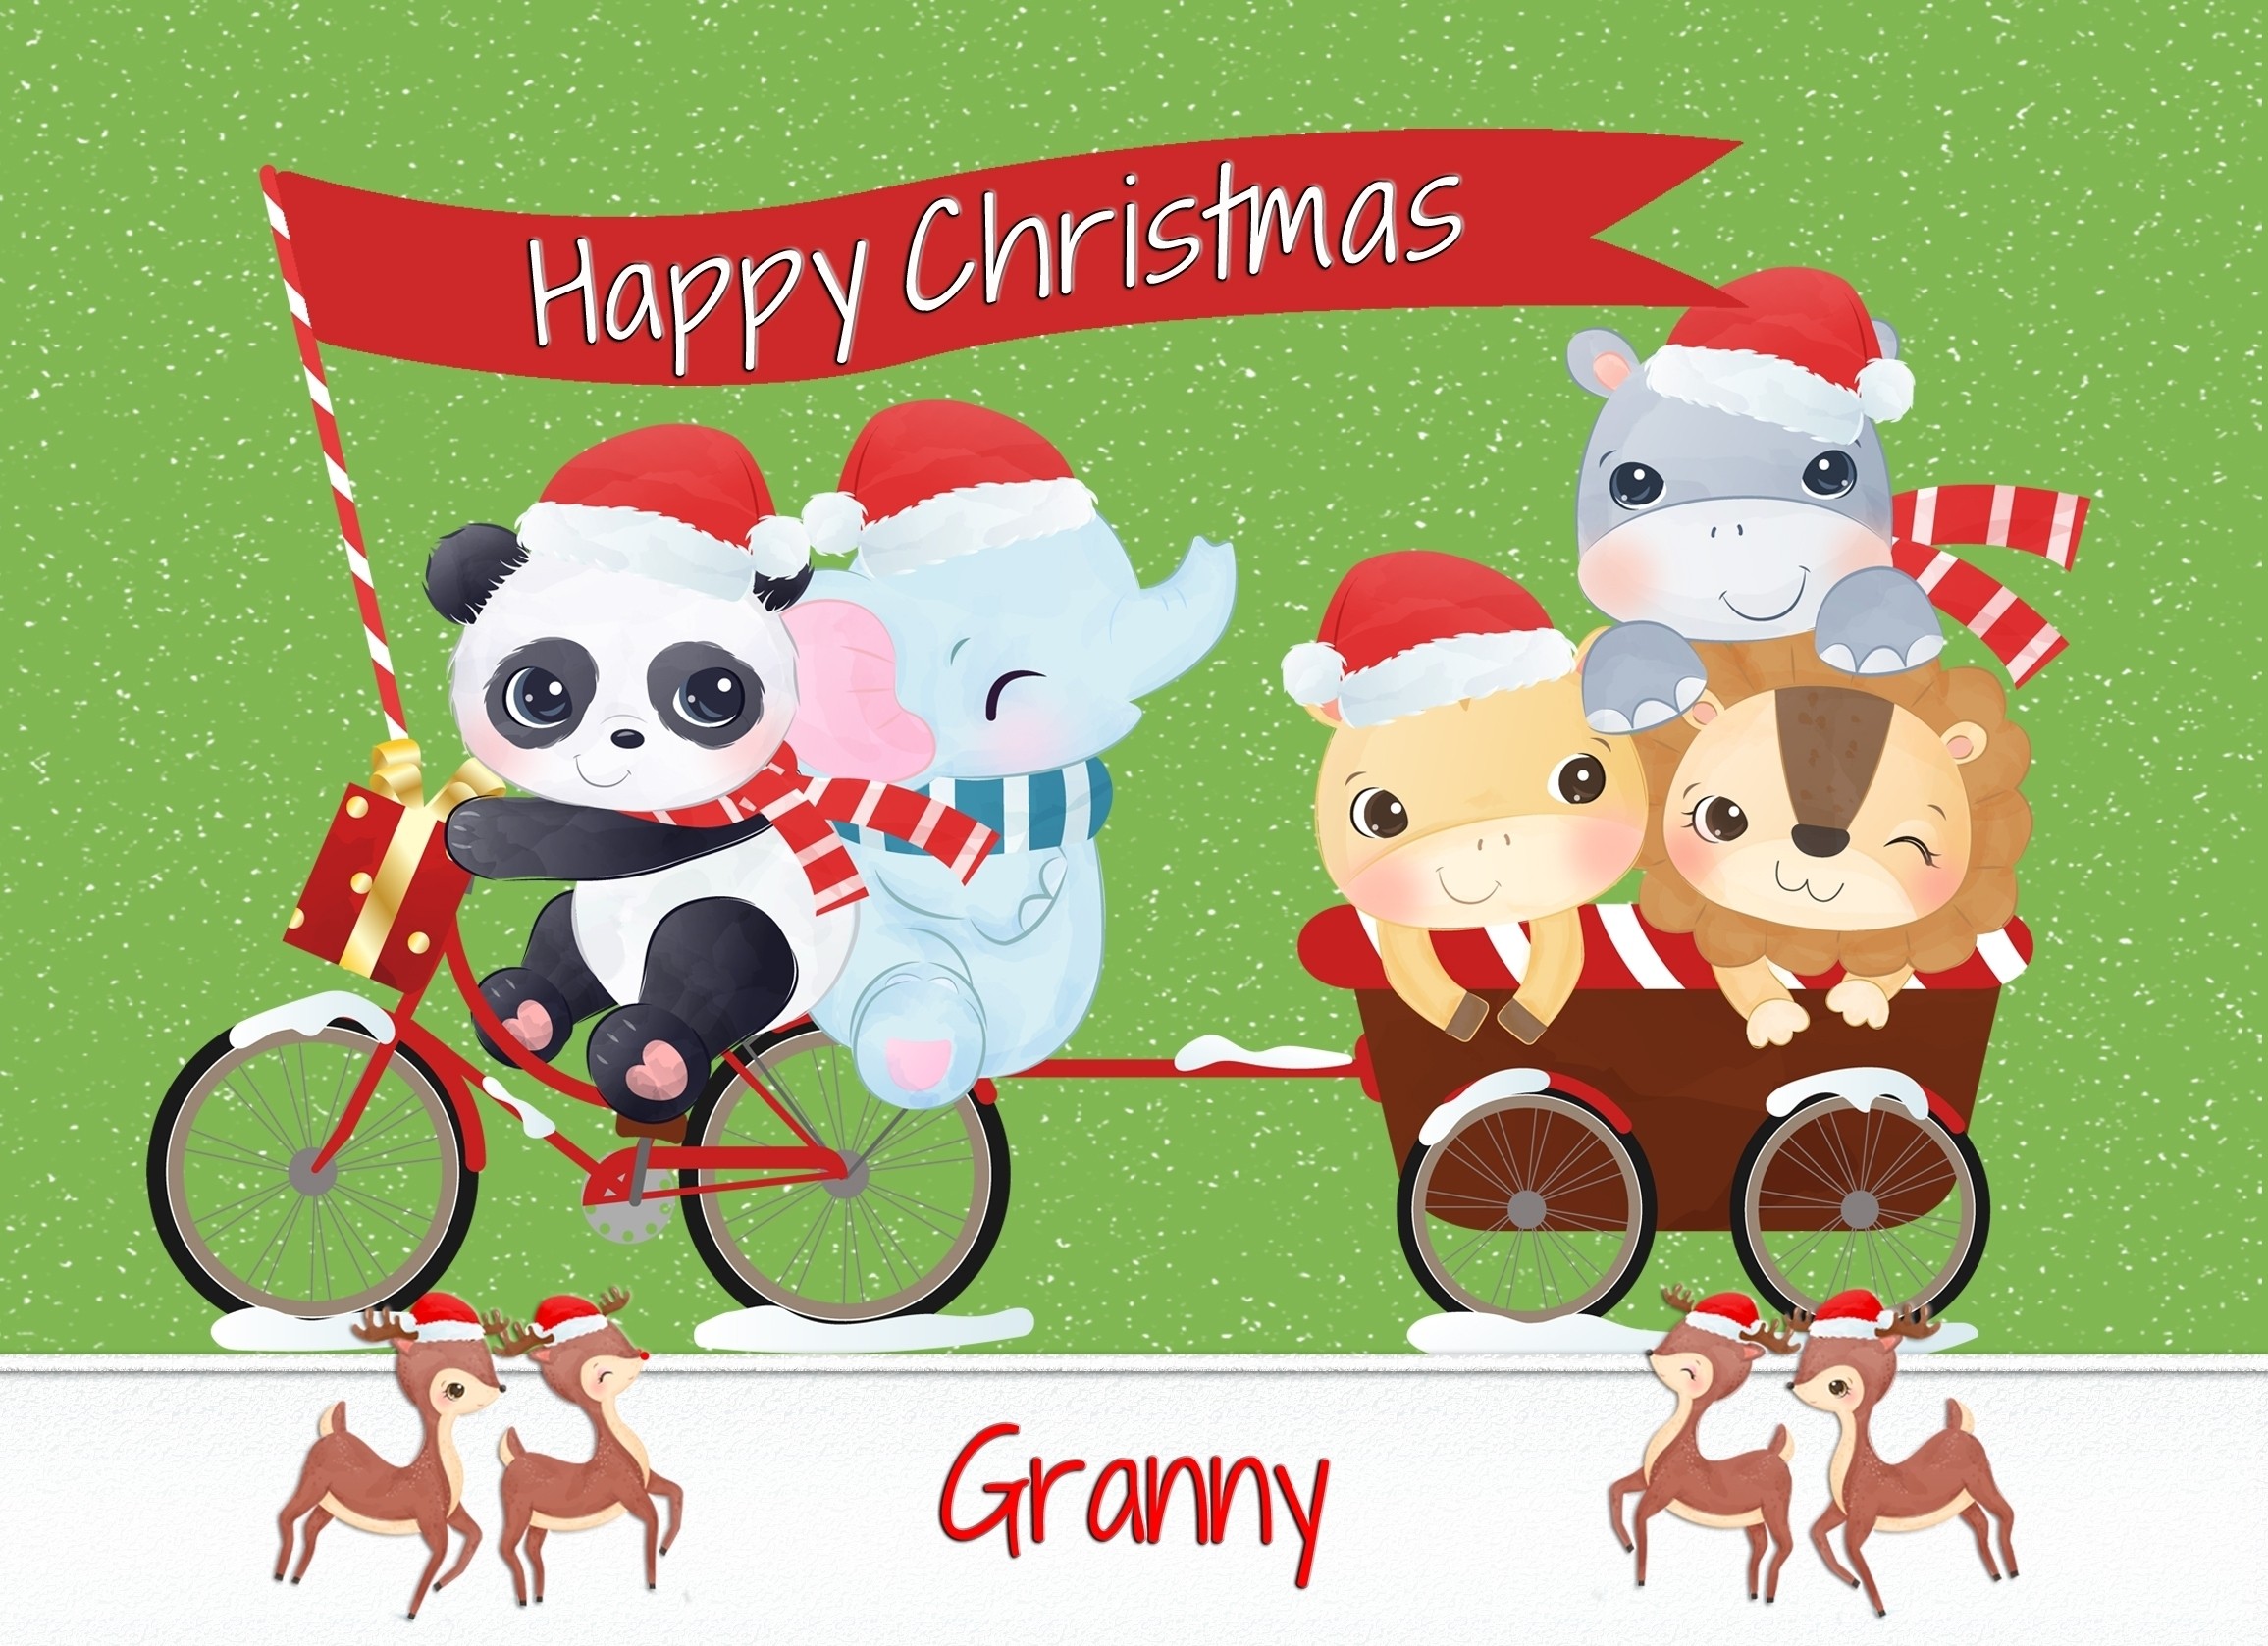 Christmas Card For Granny (Green Animals)